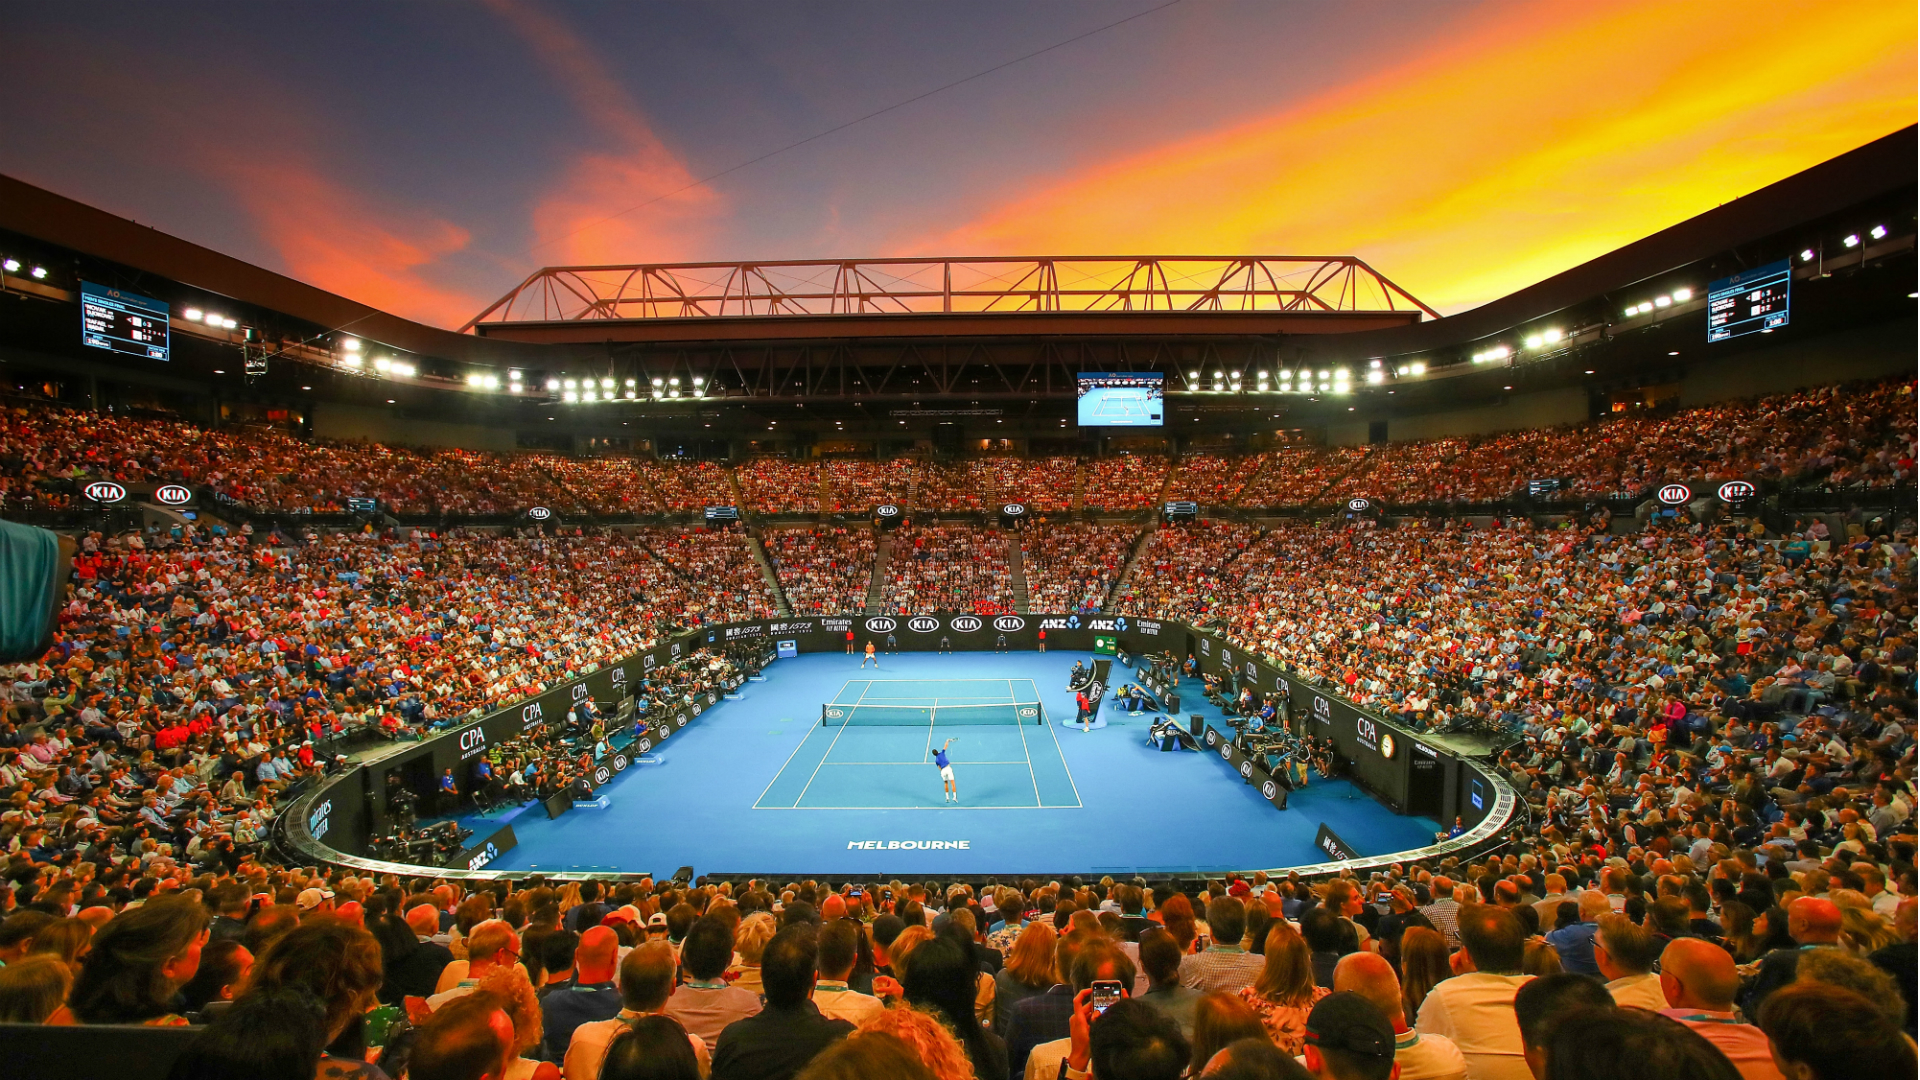 Plans for the 2021 Australian Open are close to being finalised, tournament director Craig Tiley said.